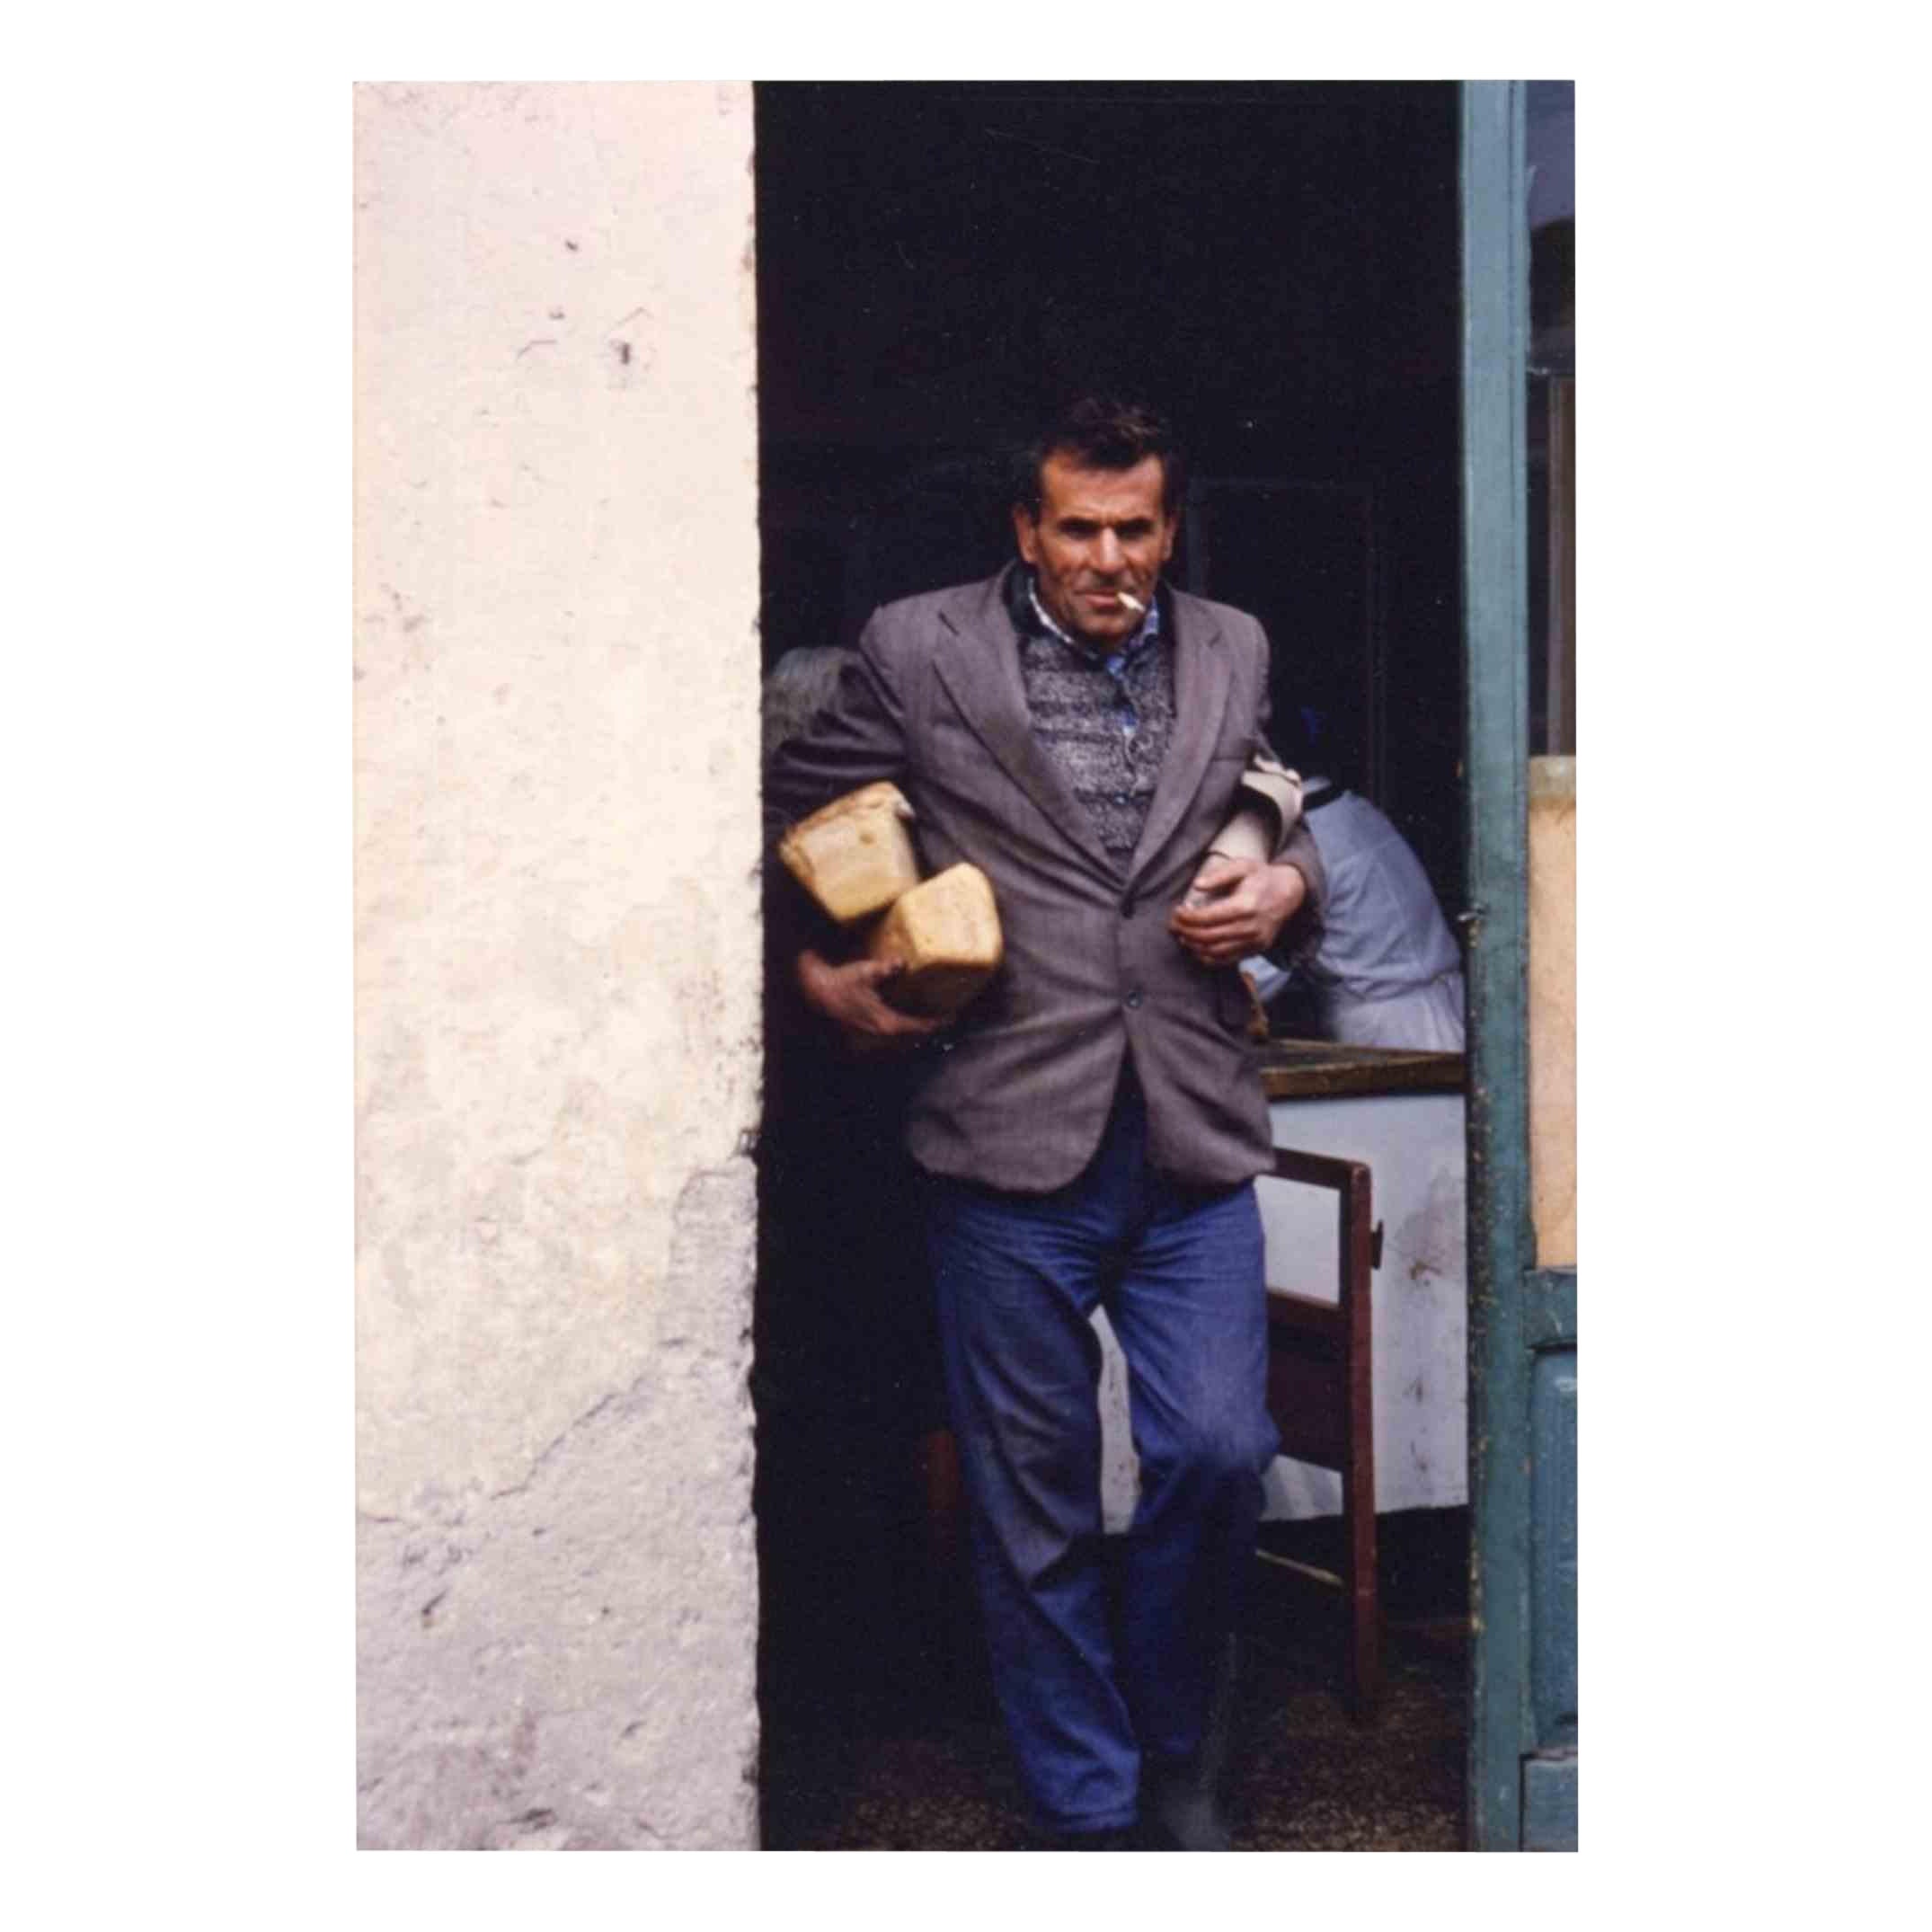 Reportage from Tirana - Bread - Vintage Photograph - Late 1970s